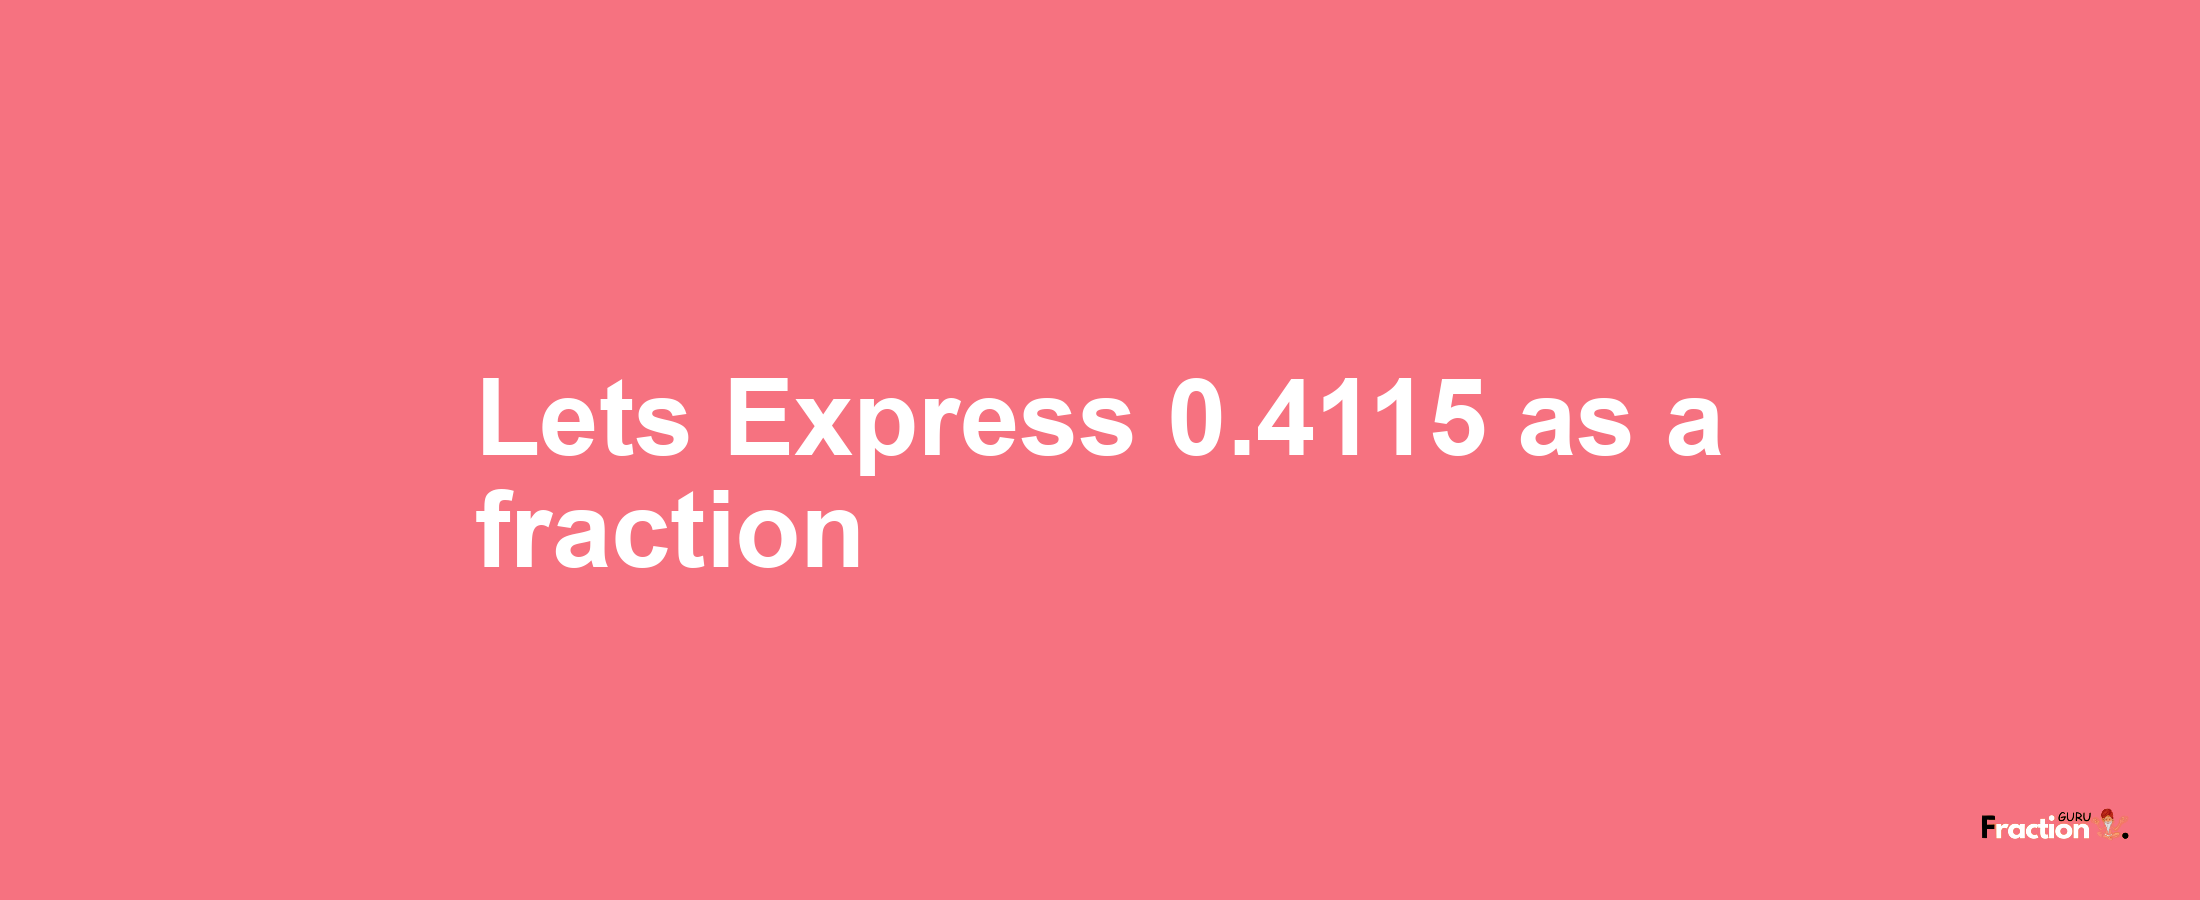 Lets Express 0.4115 as afraction